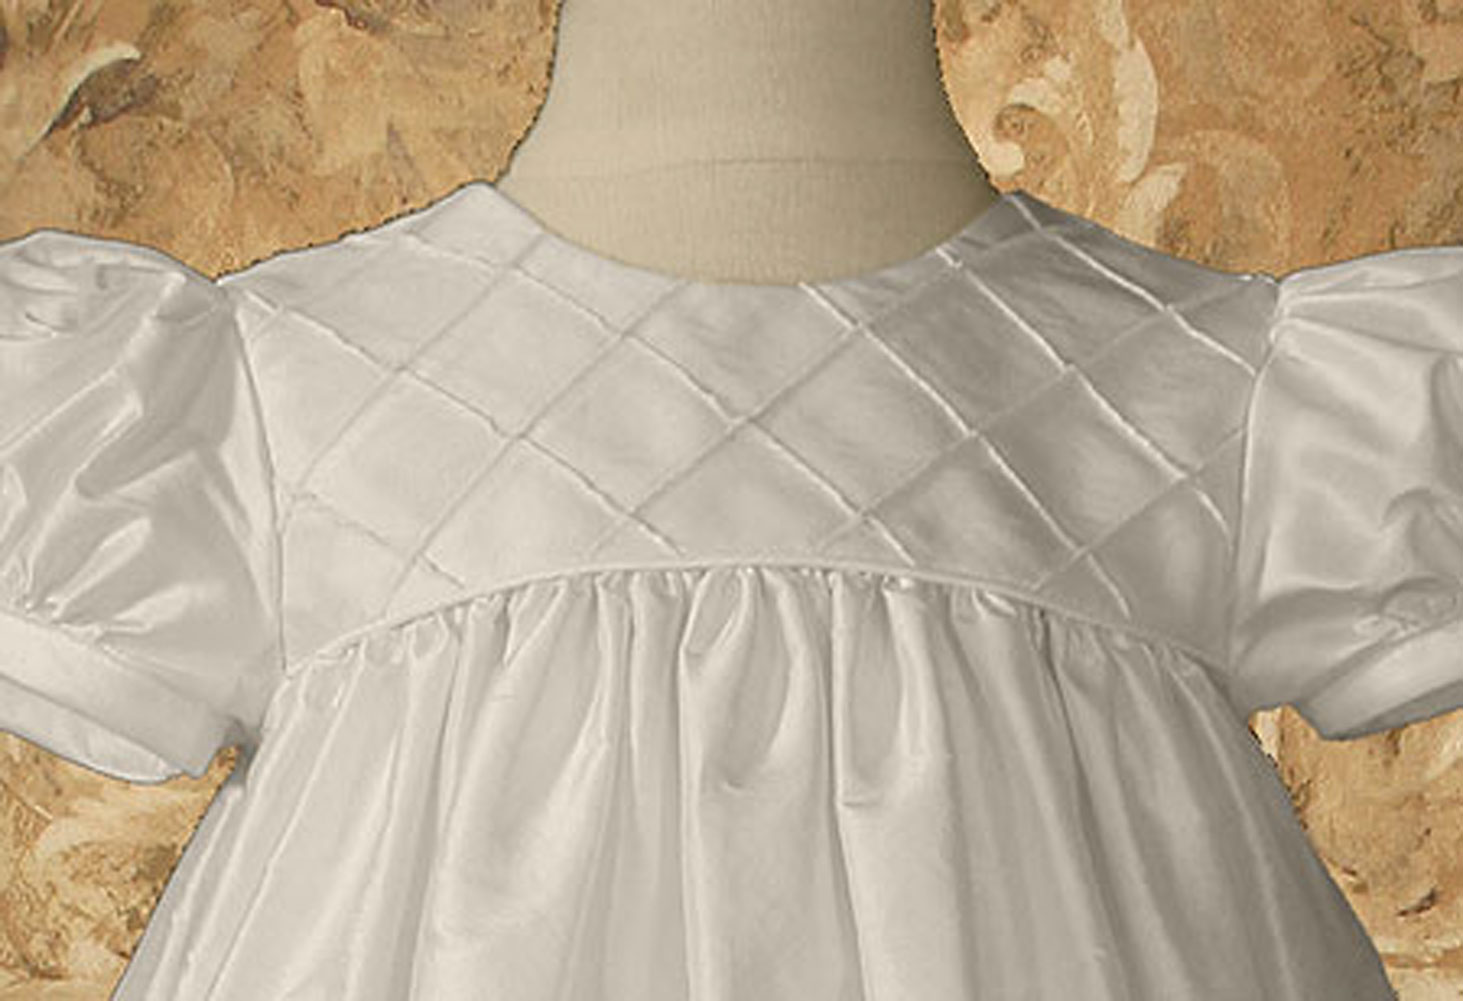 Girls 26" Silk Dupioni Dress Baptism Gown with Lattice Bodice - Little Things Mean a Lot